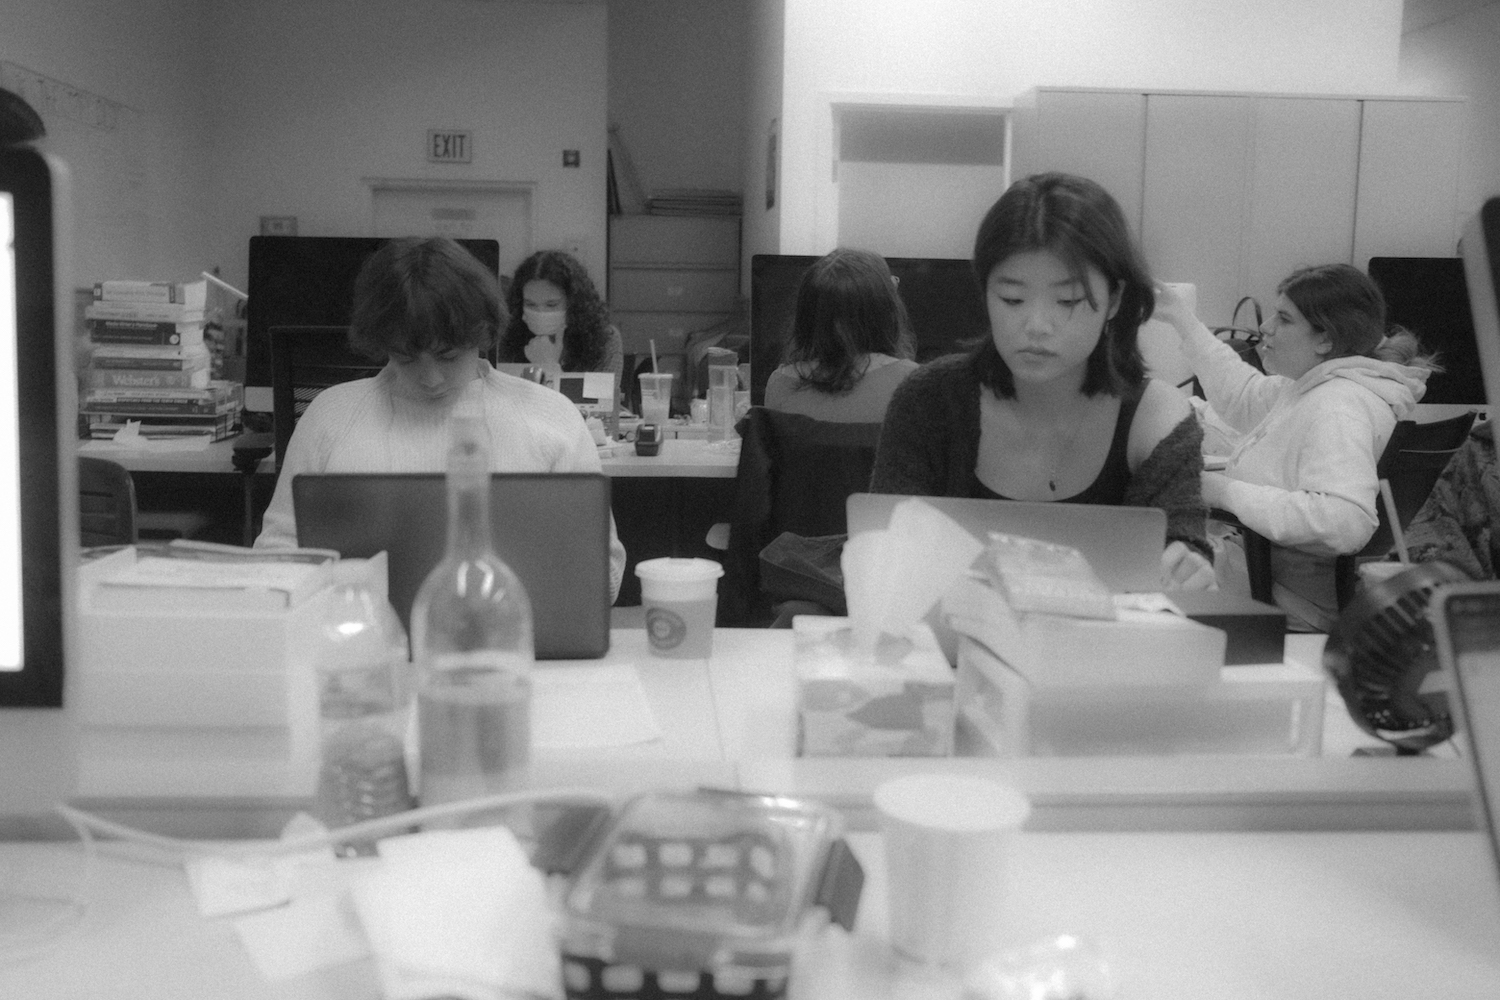 Nicolas Pedrero-Setzer and Stephanie Wong sit next to each other working on regular production.